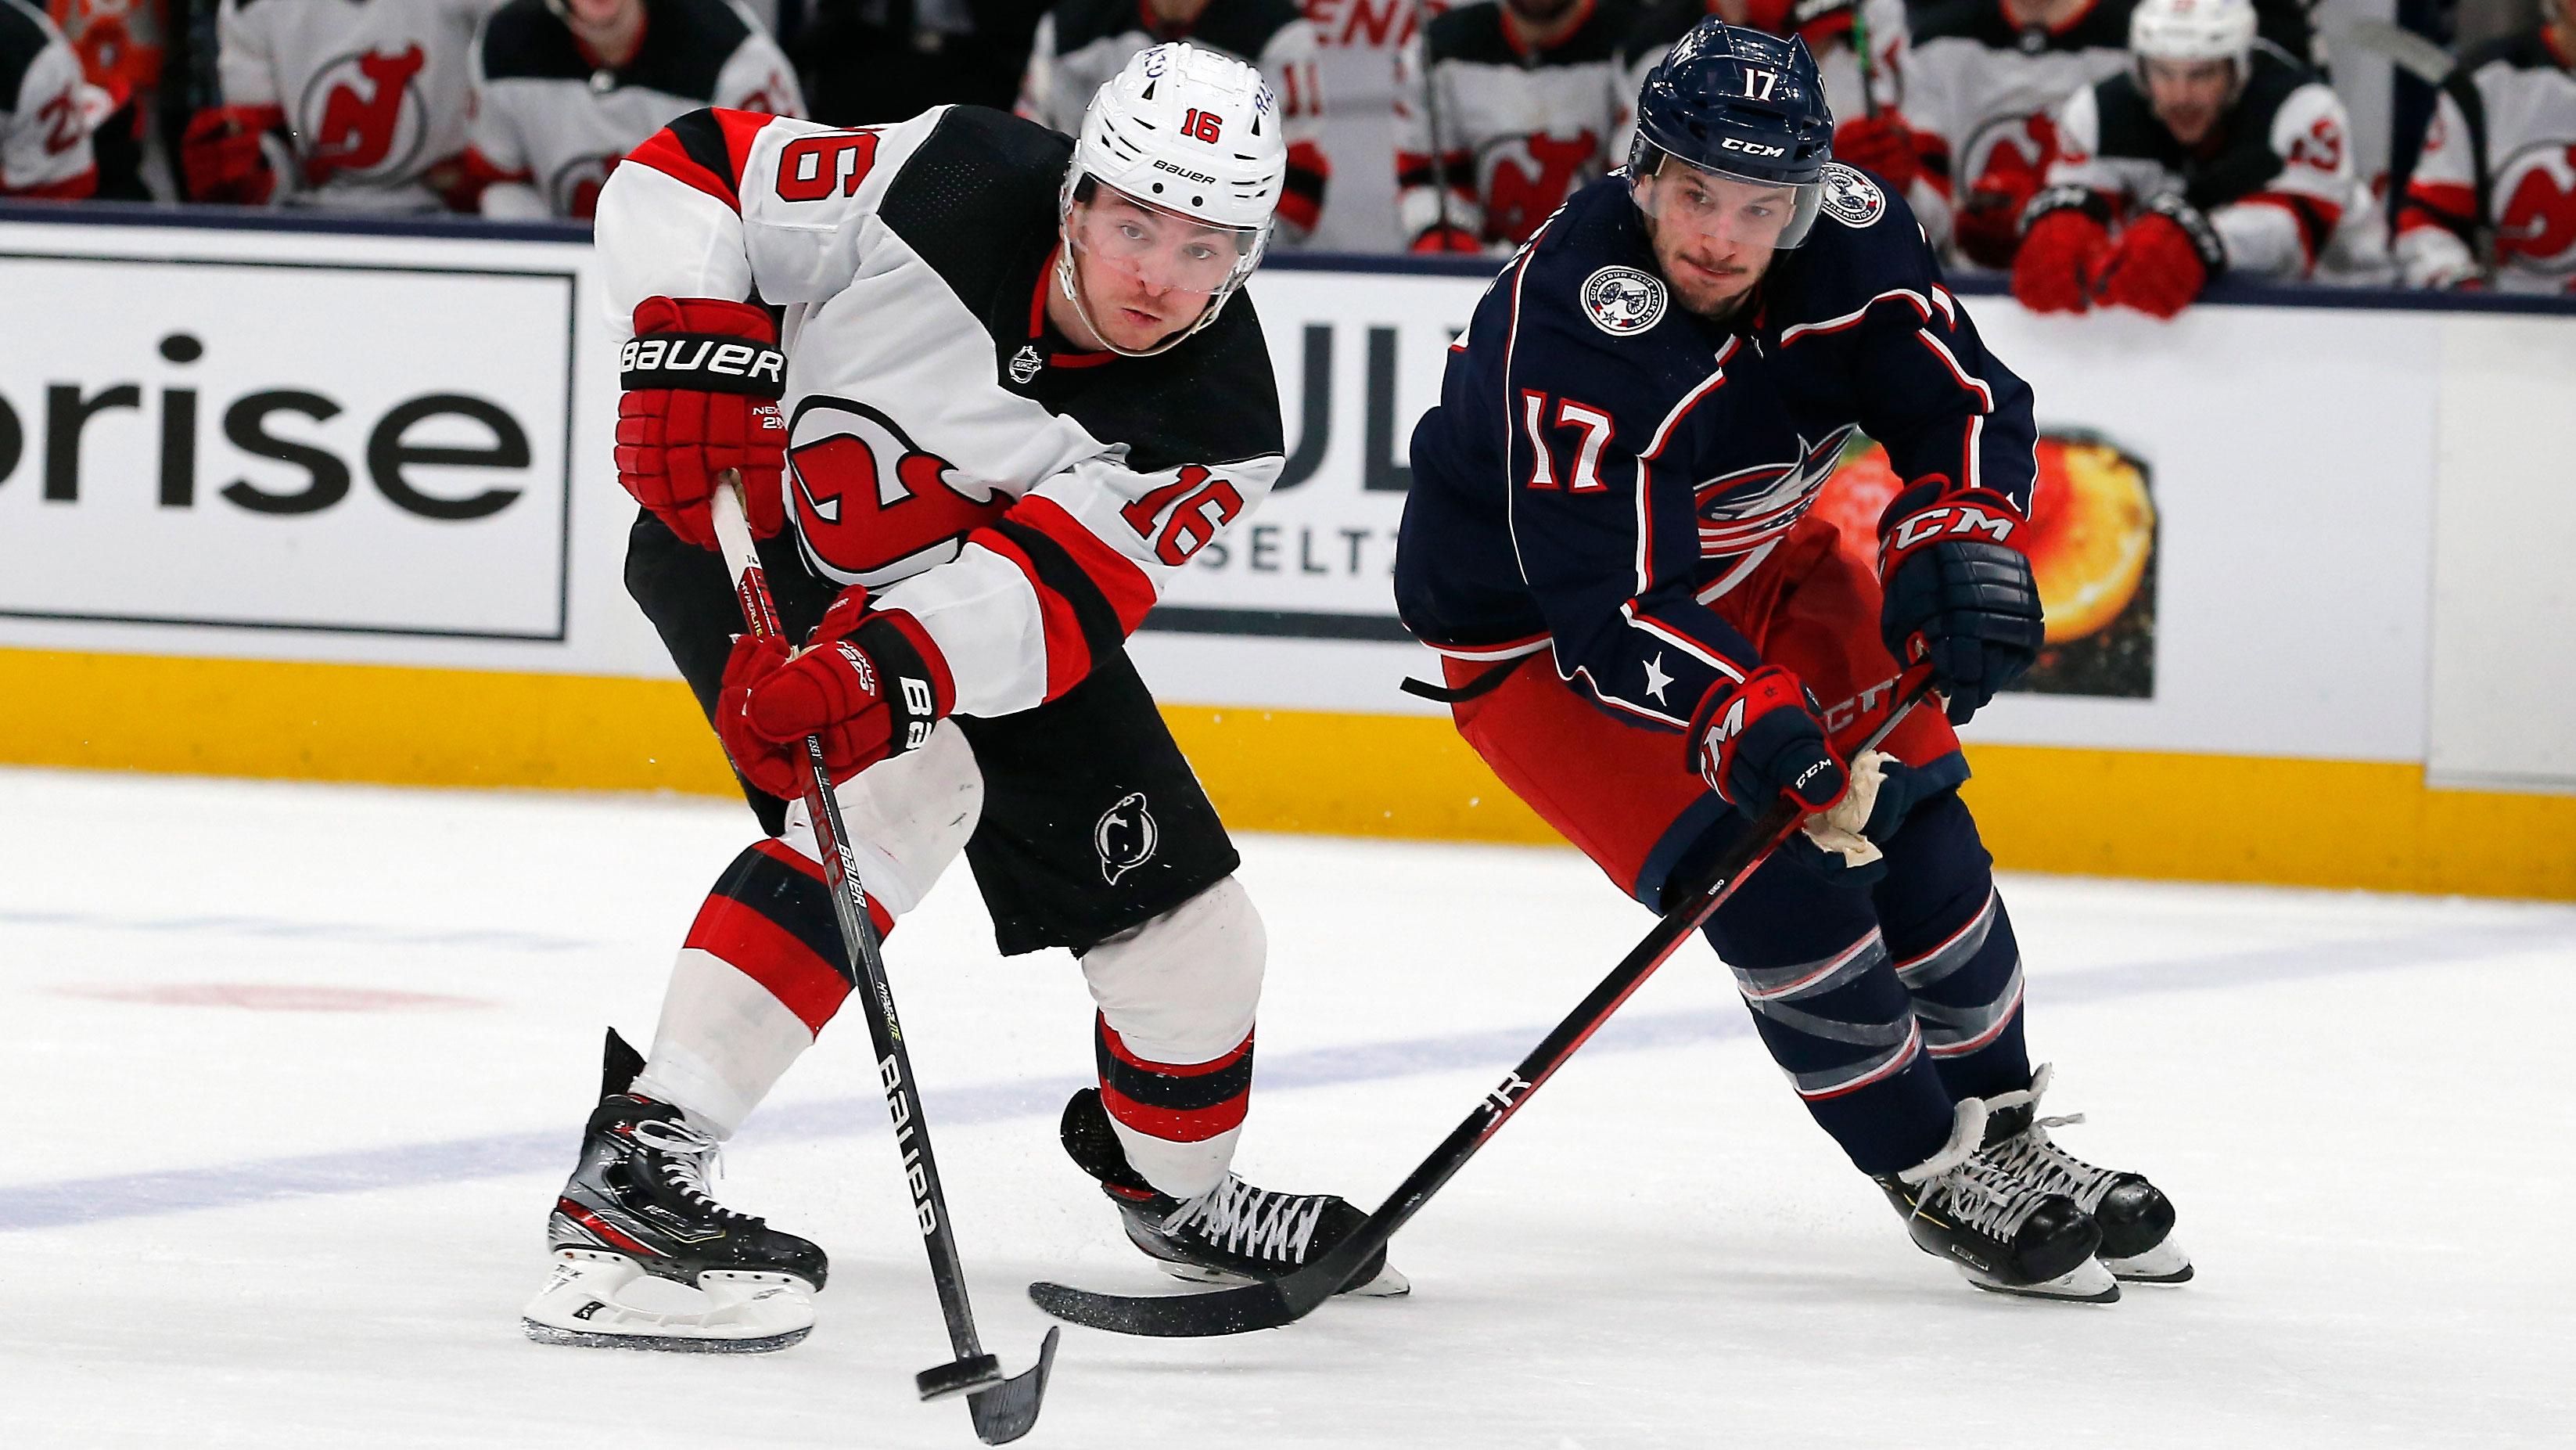 Mar 1, 2022; Columbus, Ohio, USA; New Jersey Devils left wing Jimmy Vesey (16) and Columbus Blue Jackets center Justin Danforth (17) chase down a loose puck during the second period at Nationwide Arena. / Russell LaBounty-USA TODAY Sports